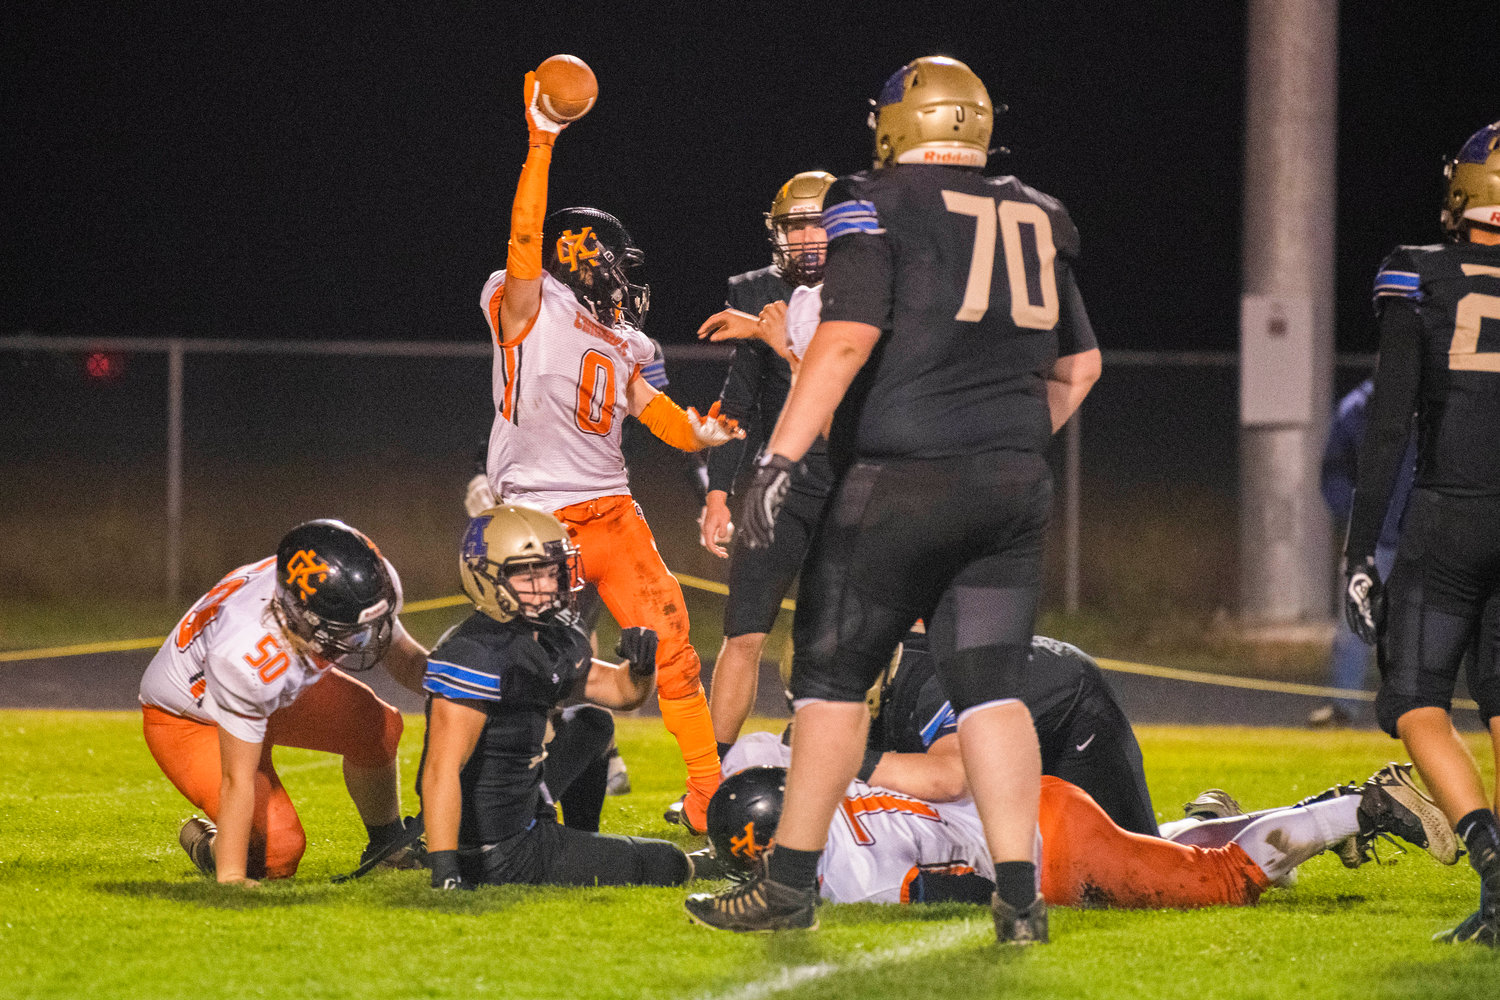 Kalama junior Hayden Lawson (0) comes up with the ball after a fumble during a game Thursday night in Adna.